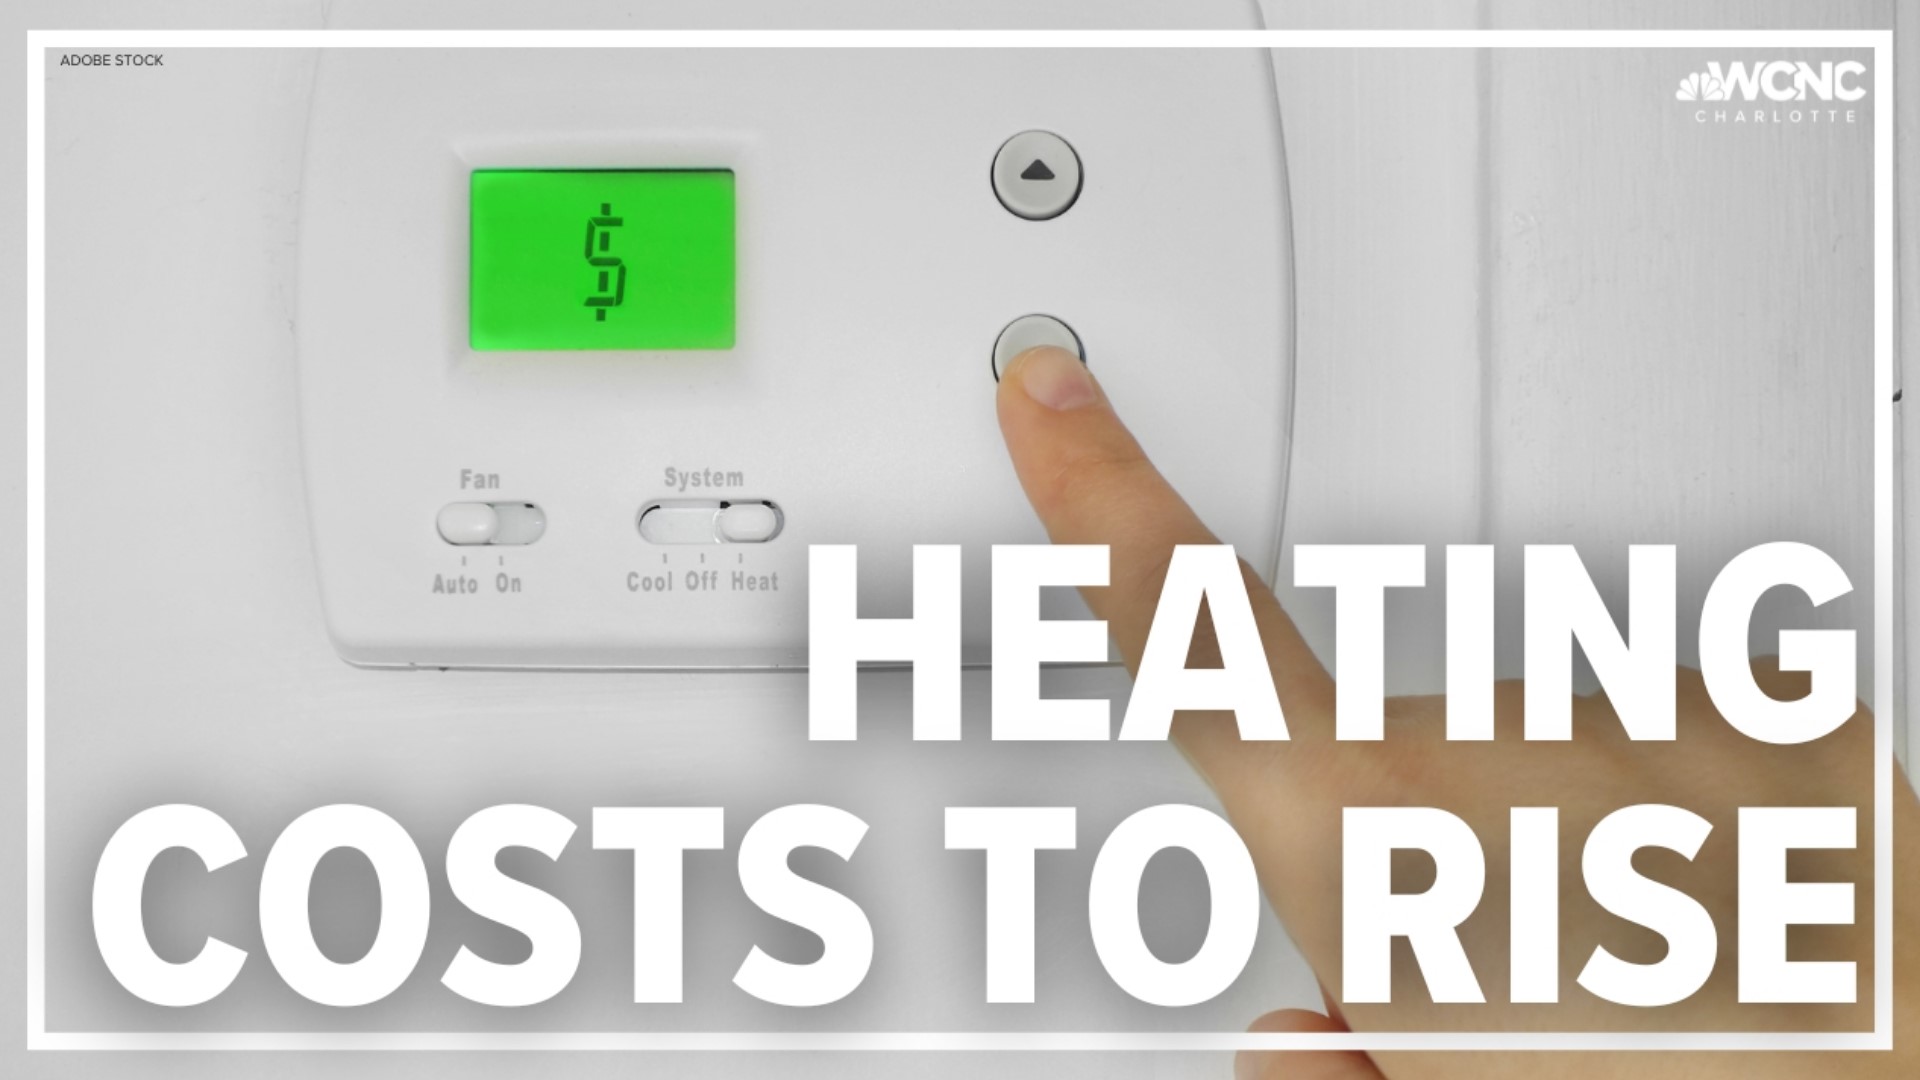 Heating costs for this upcoming winter are expected to reach a 10-year high with the average family paying $1,200 to keep their house warm.